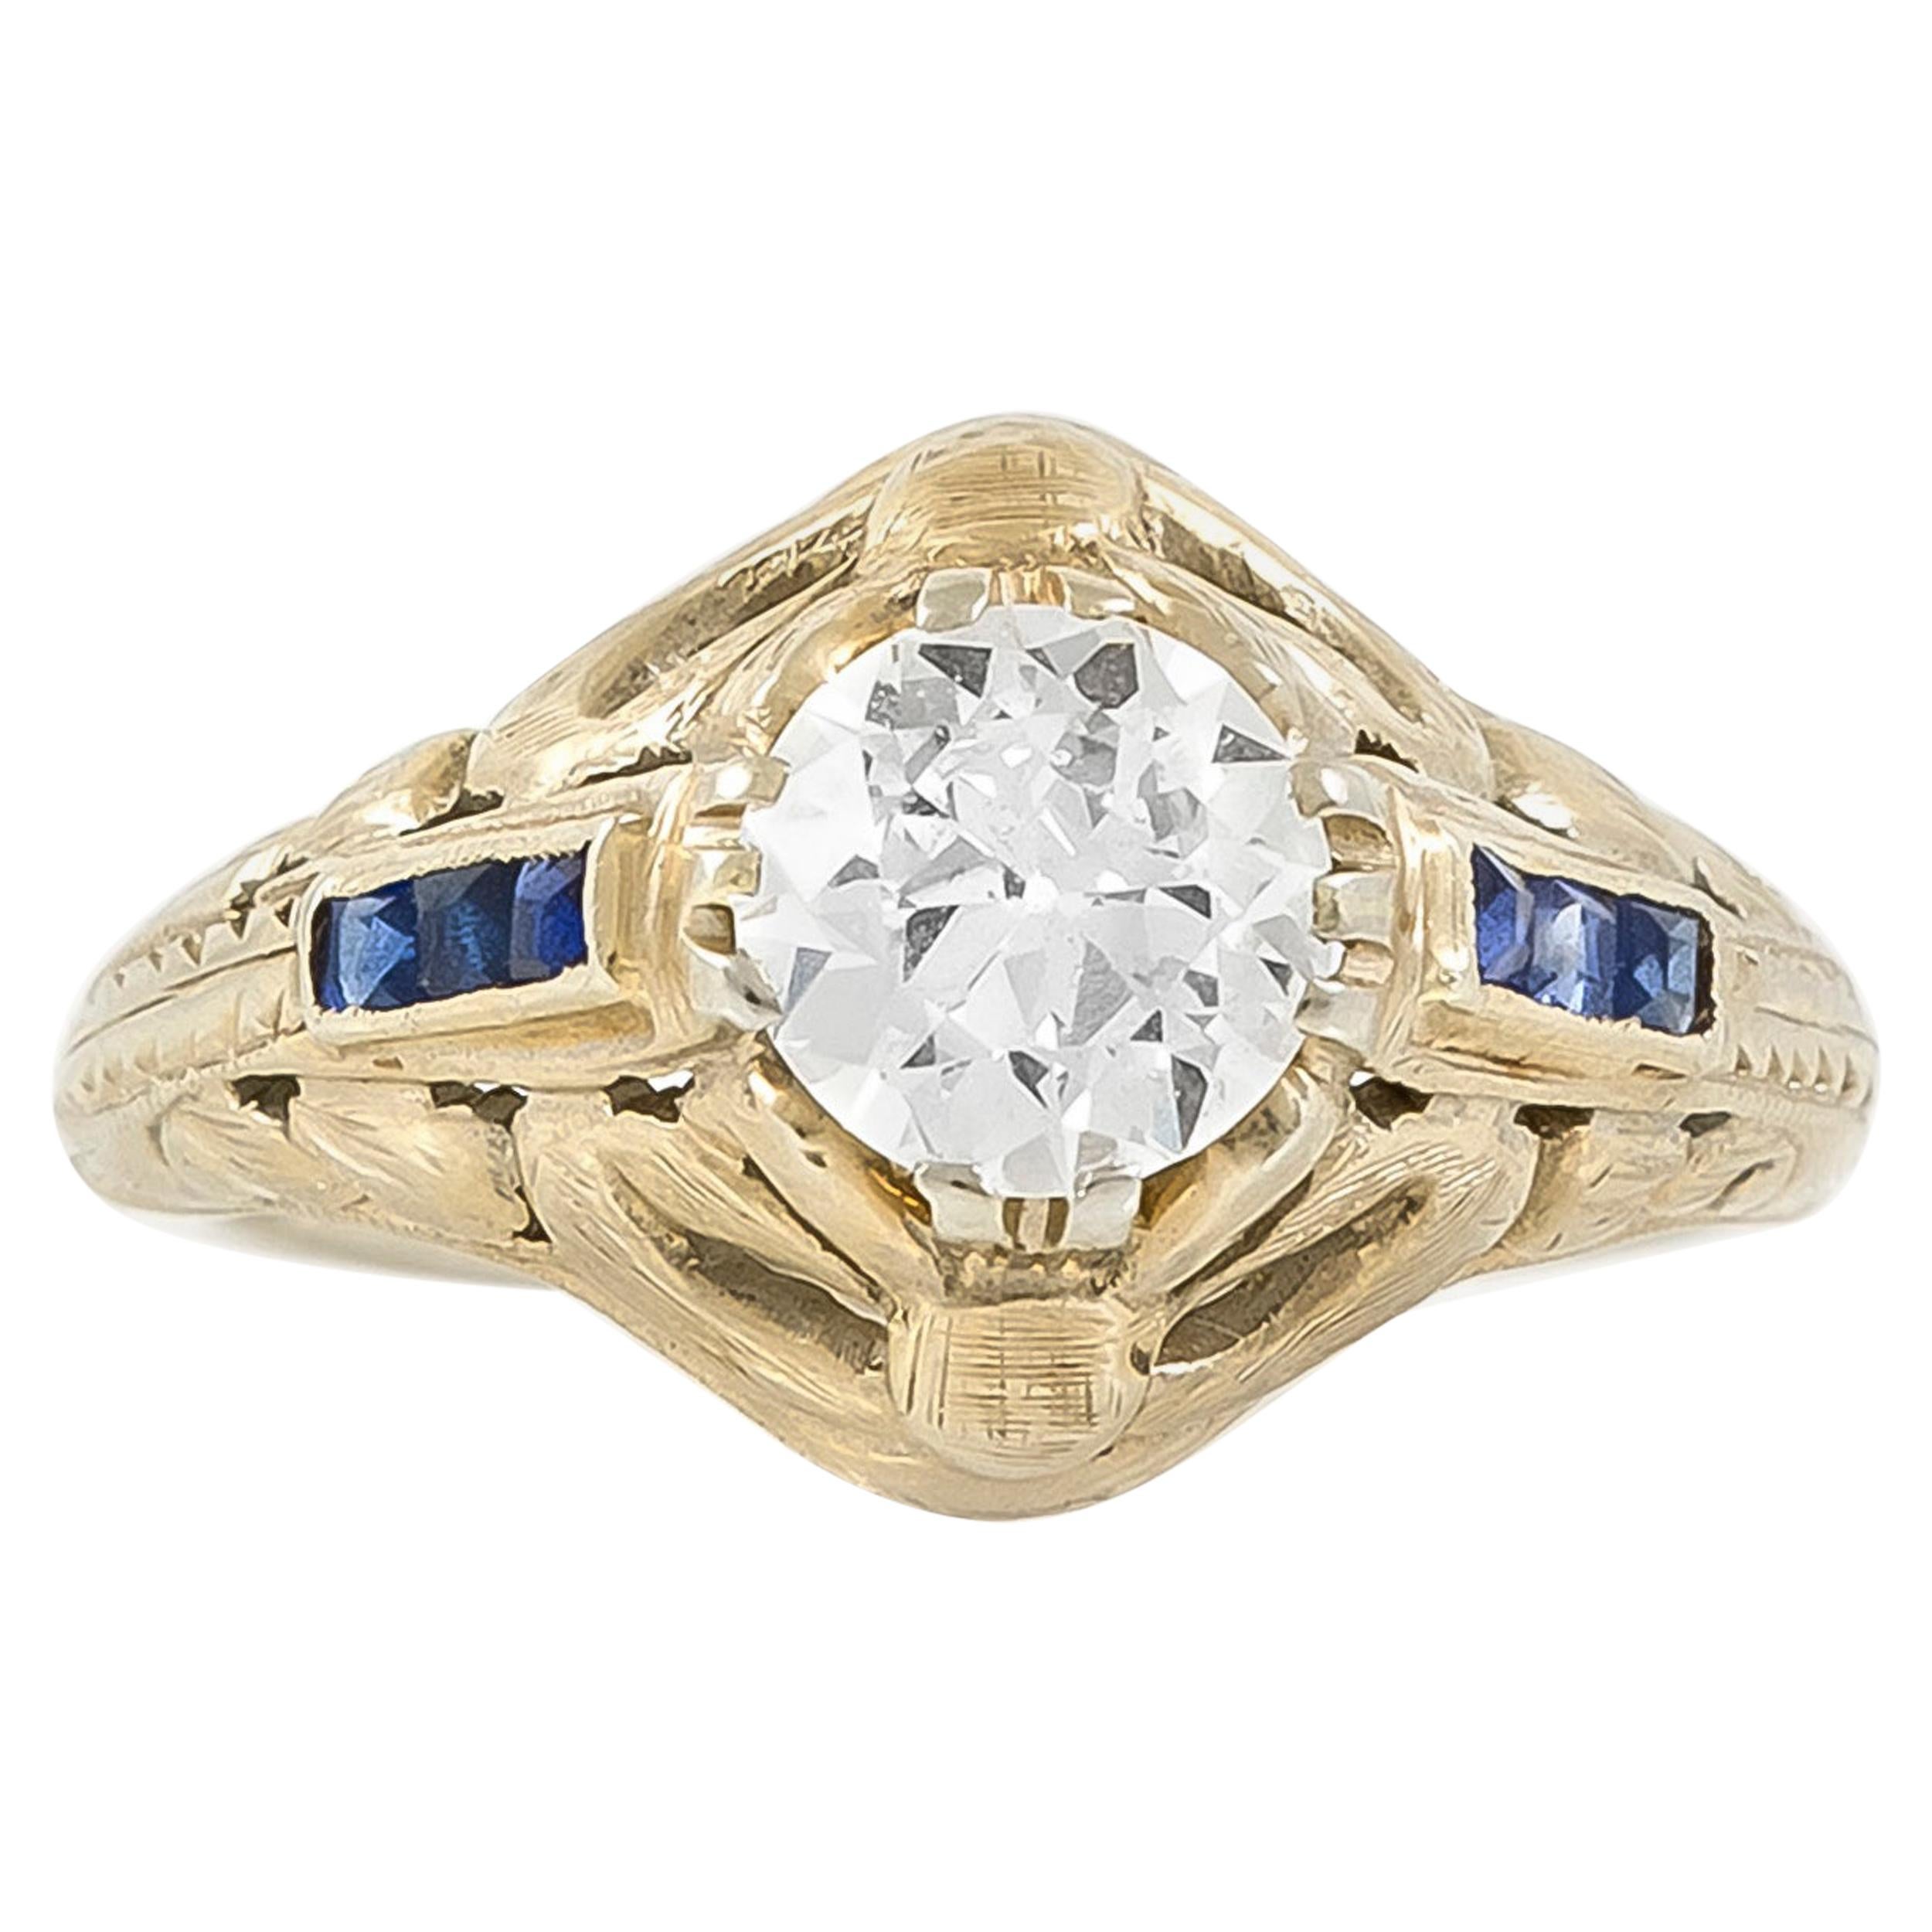 1920s-1930s Engagement Ring with 0.90 Carat Diamond